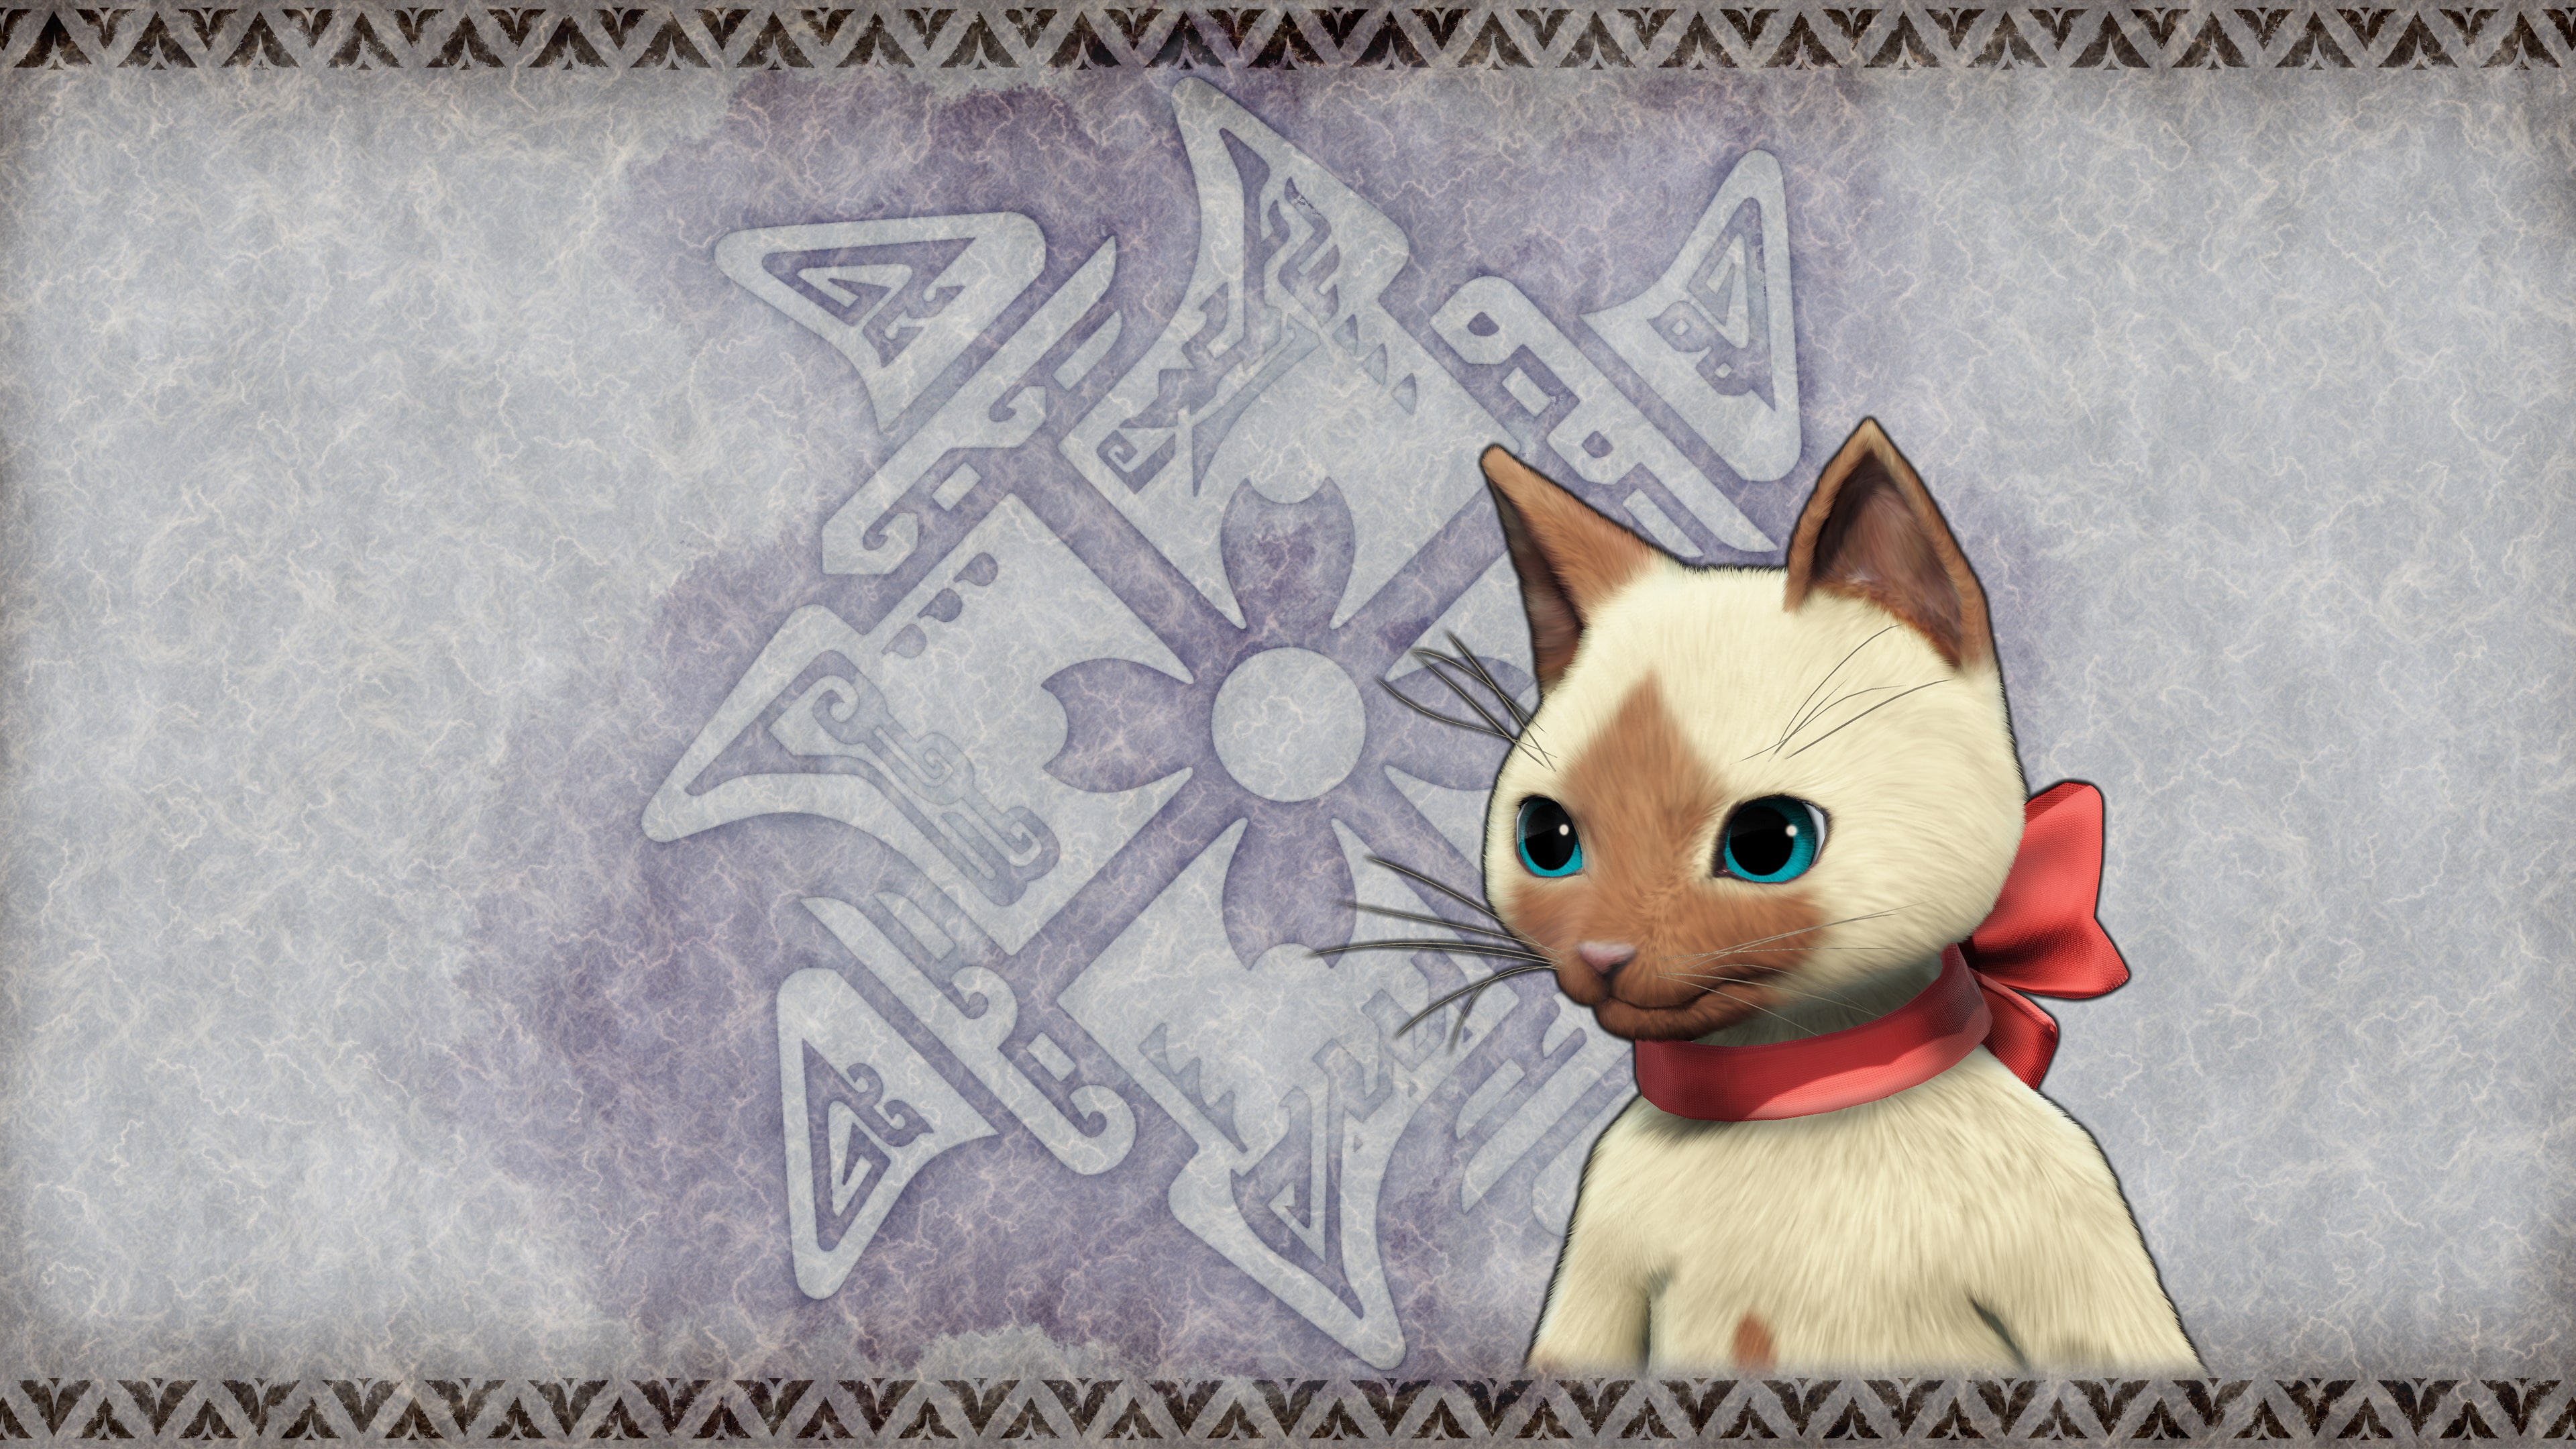 Monster Hunter Rise - "Bow Collar" Palico layered armor piece (English/Chinese/Korean/Japanese Ver.)